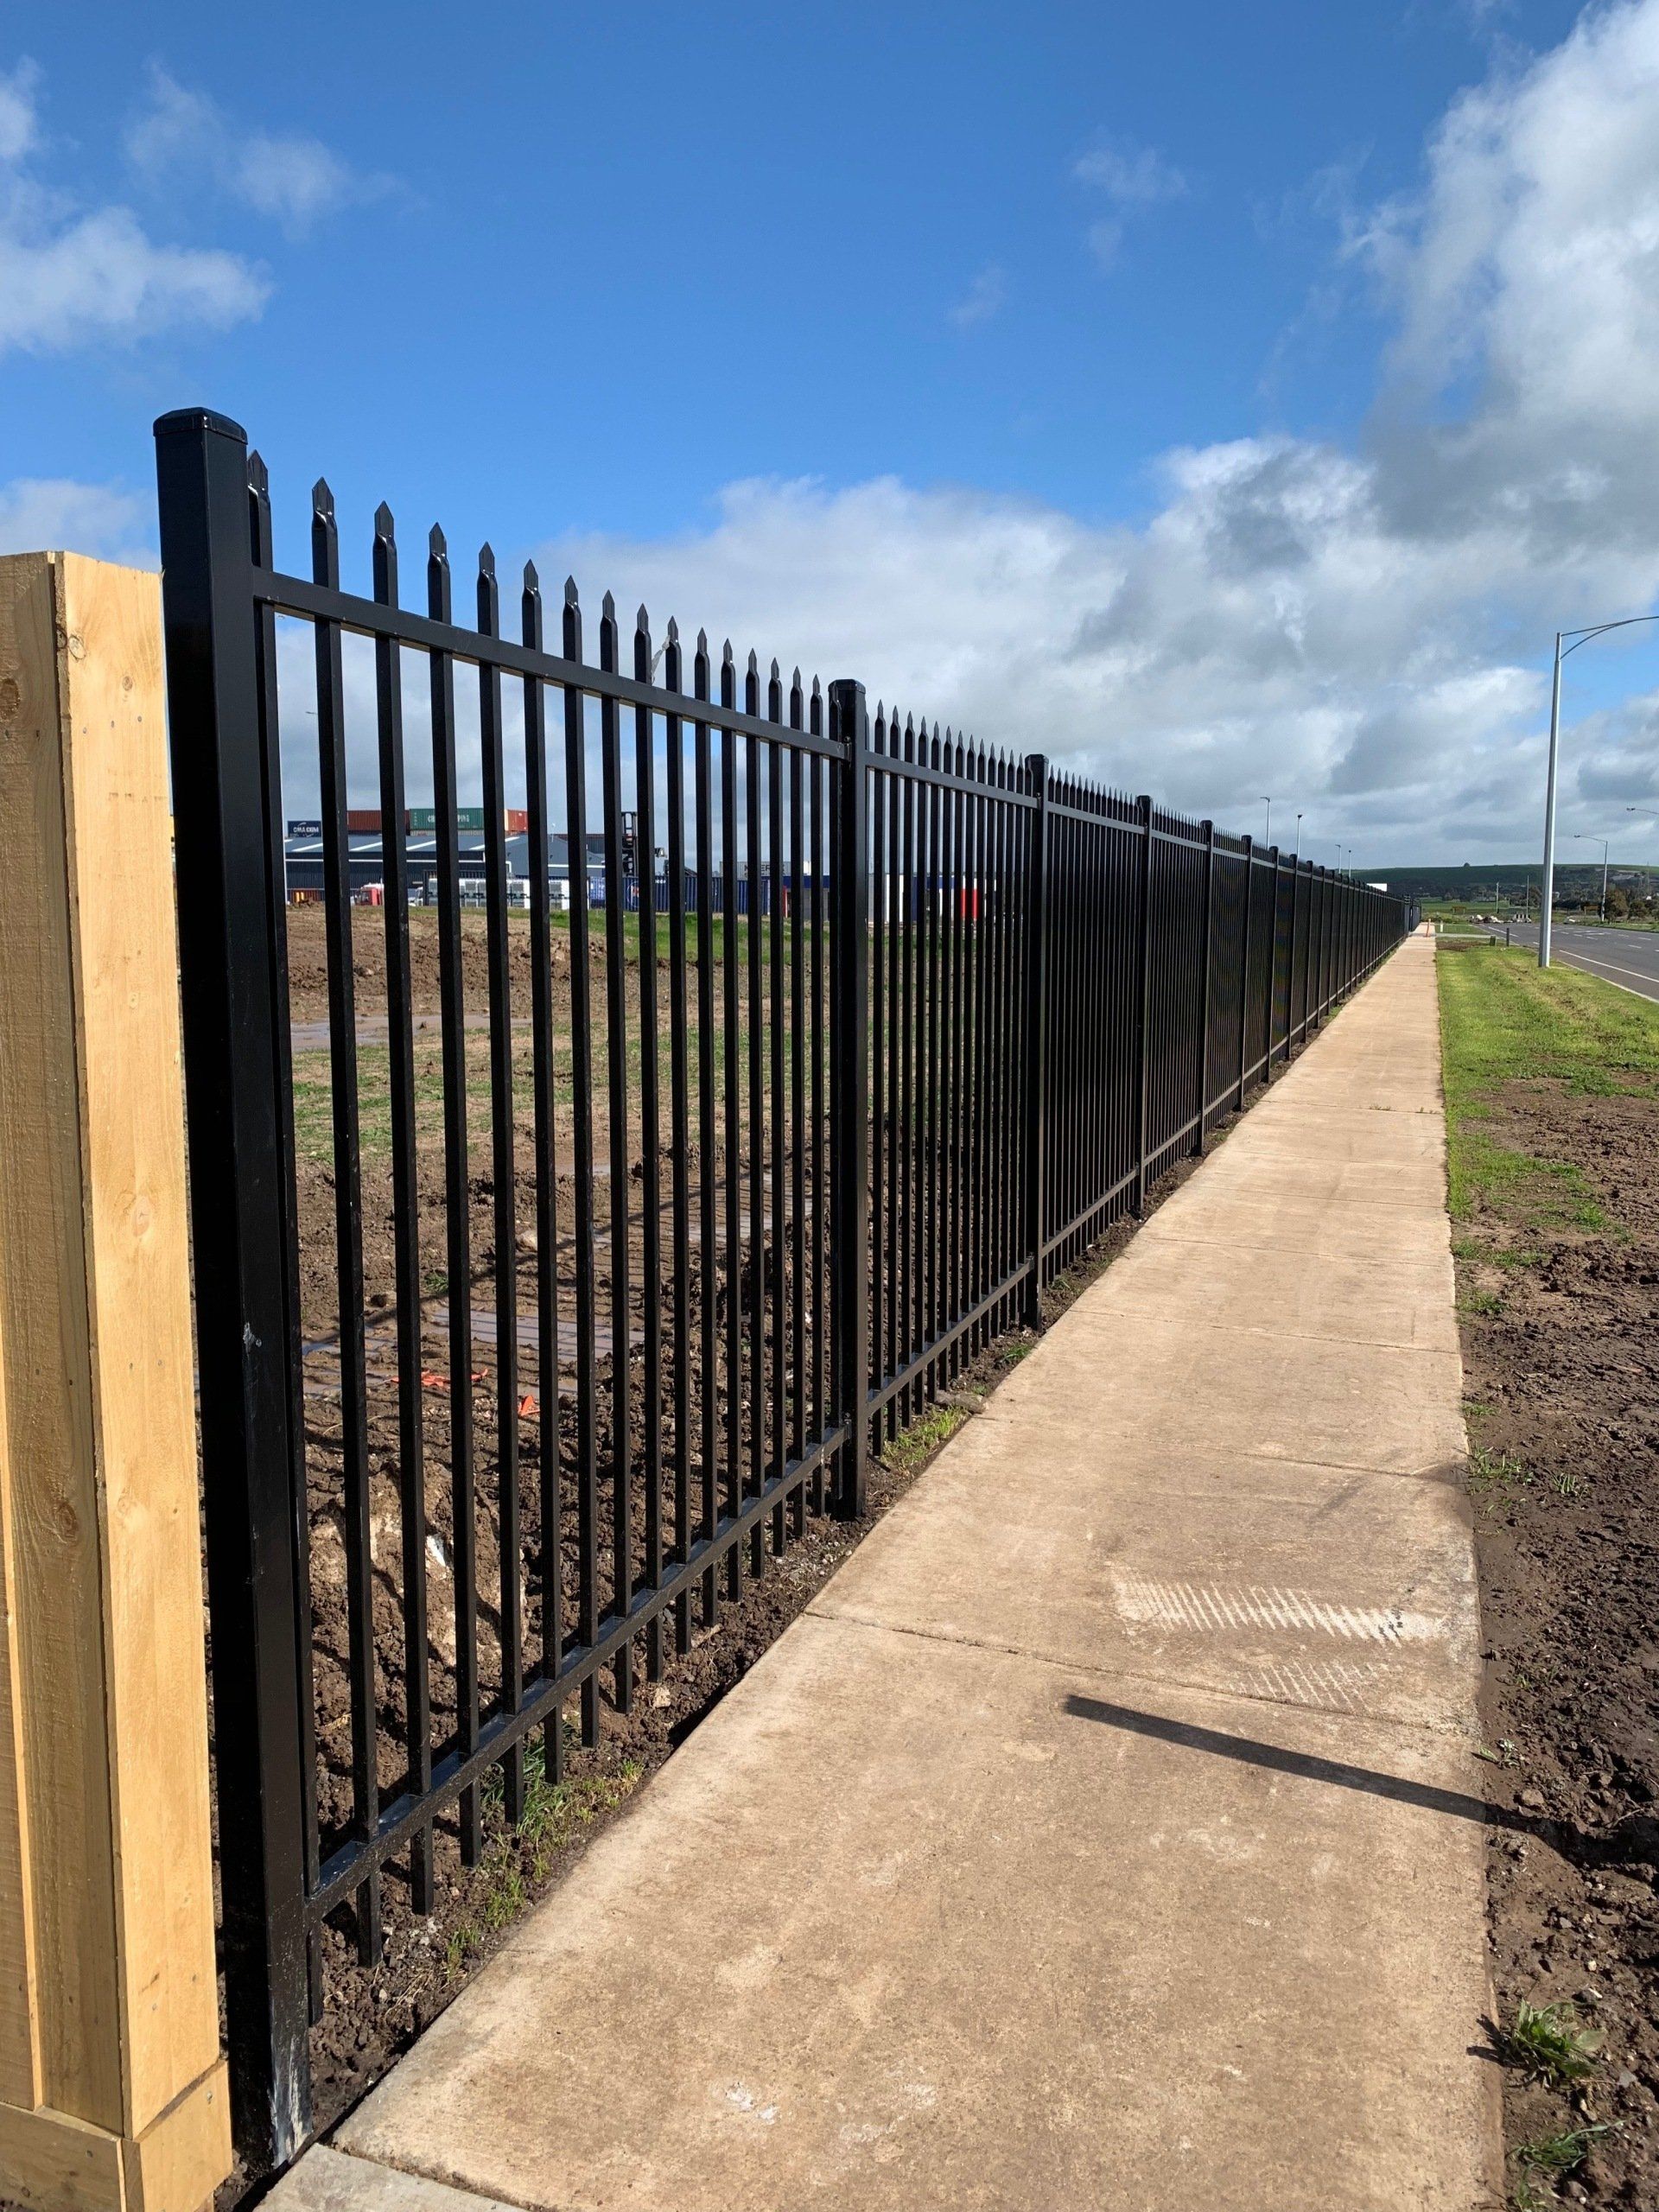 diplomat fencing and tubular steel fencing in melbourne